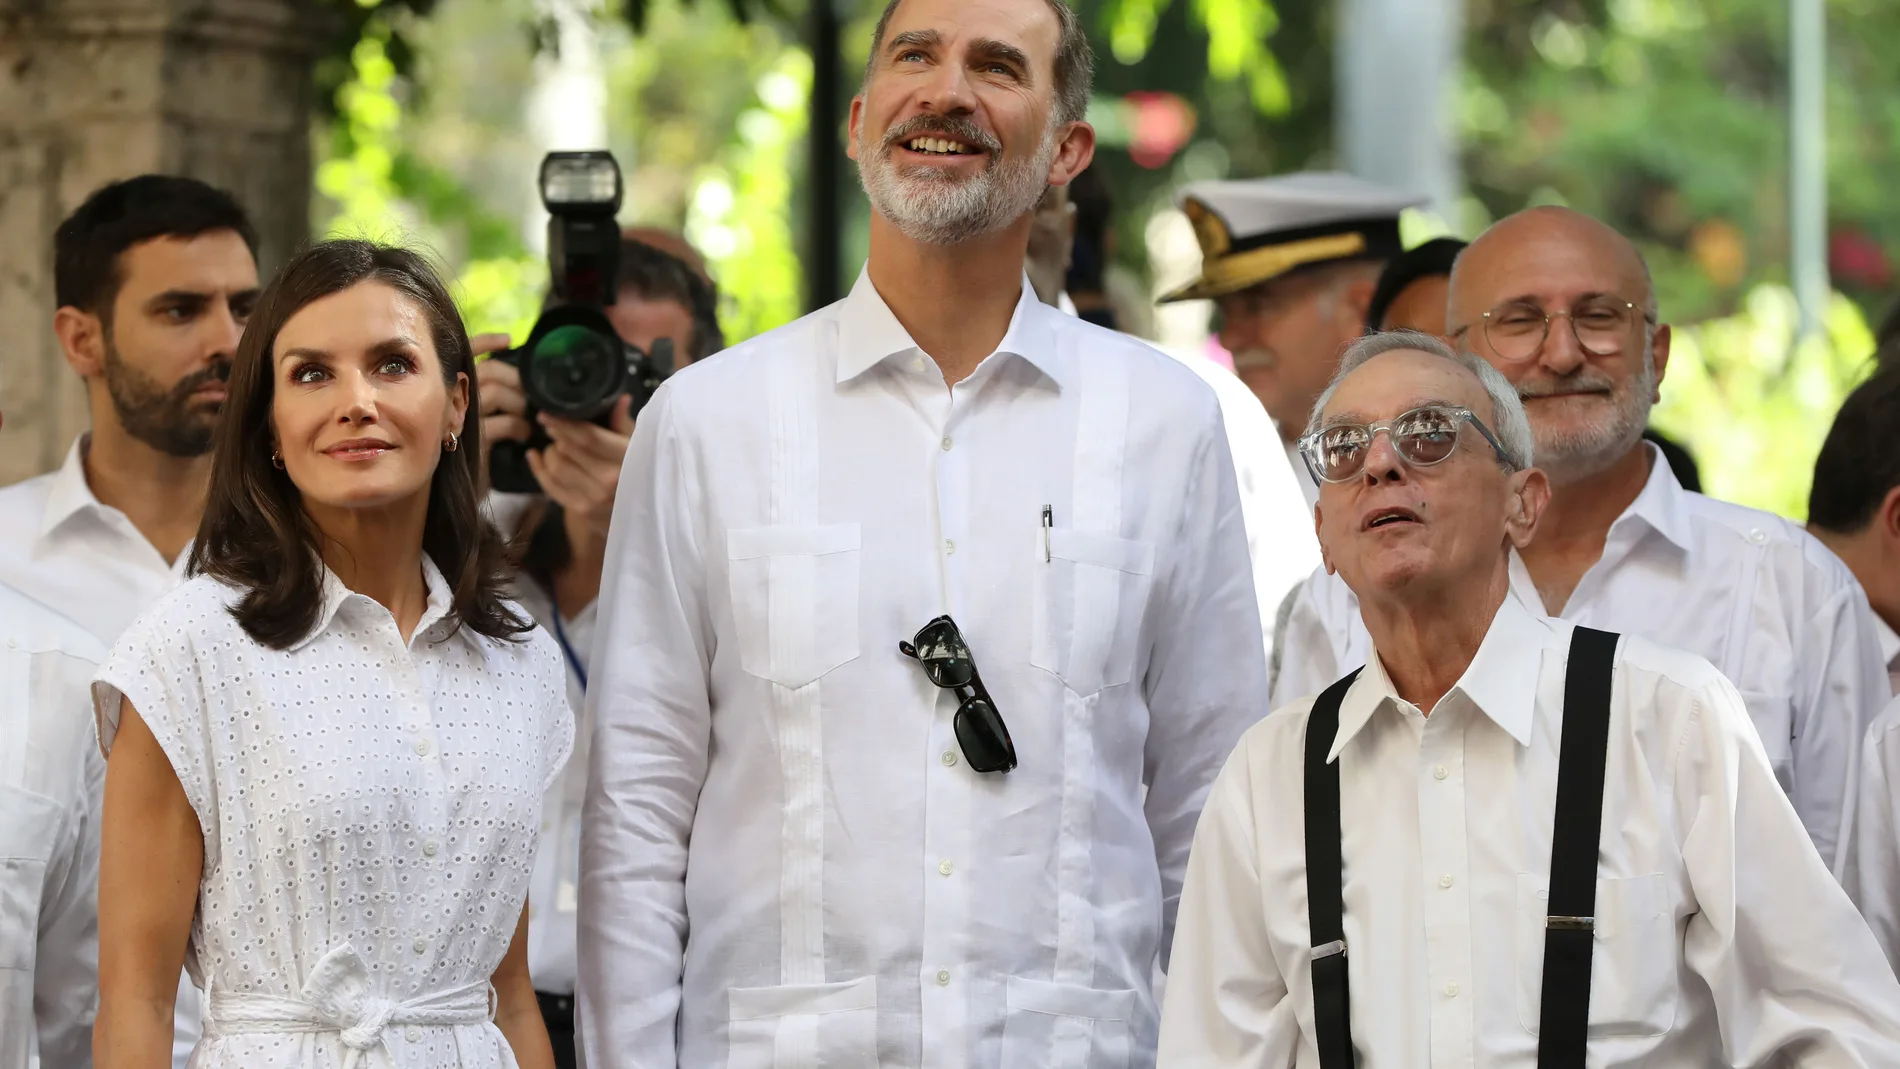 Spain's King Felipe and Queen Letizia, together with Eusebio Leal, the official historian of Havana, visit Old Havana